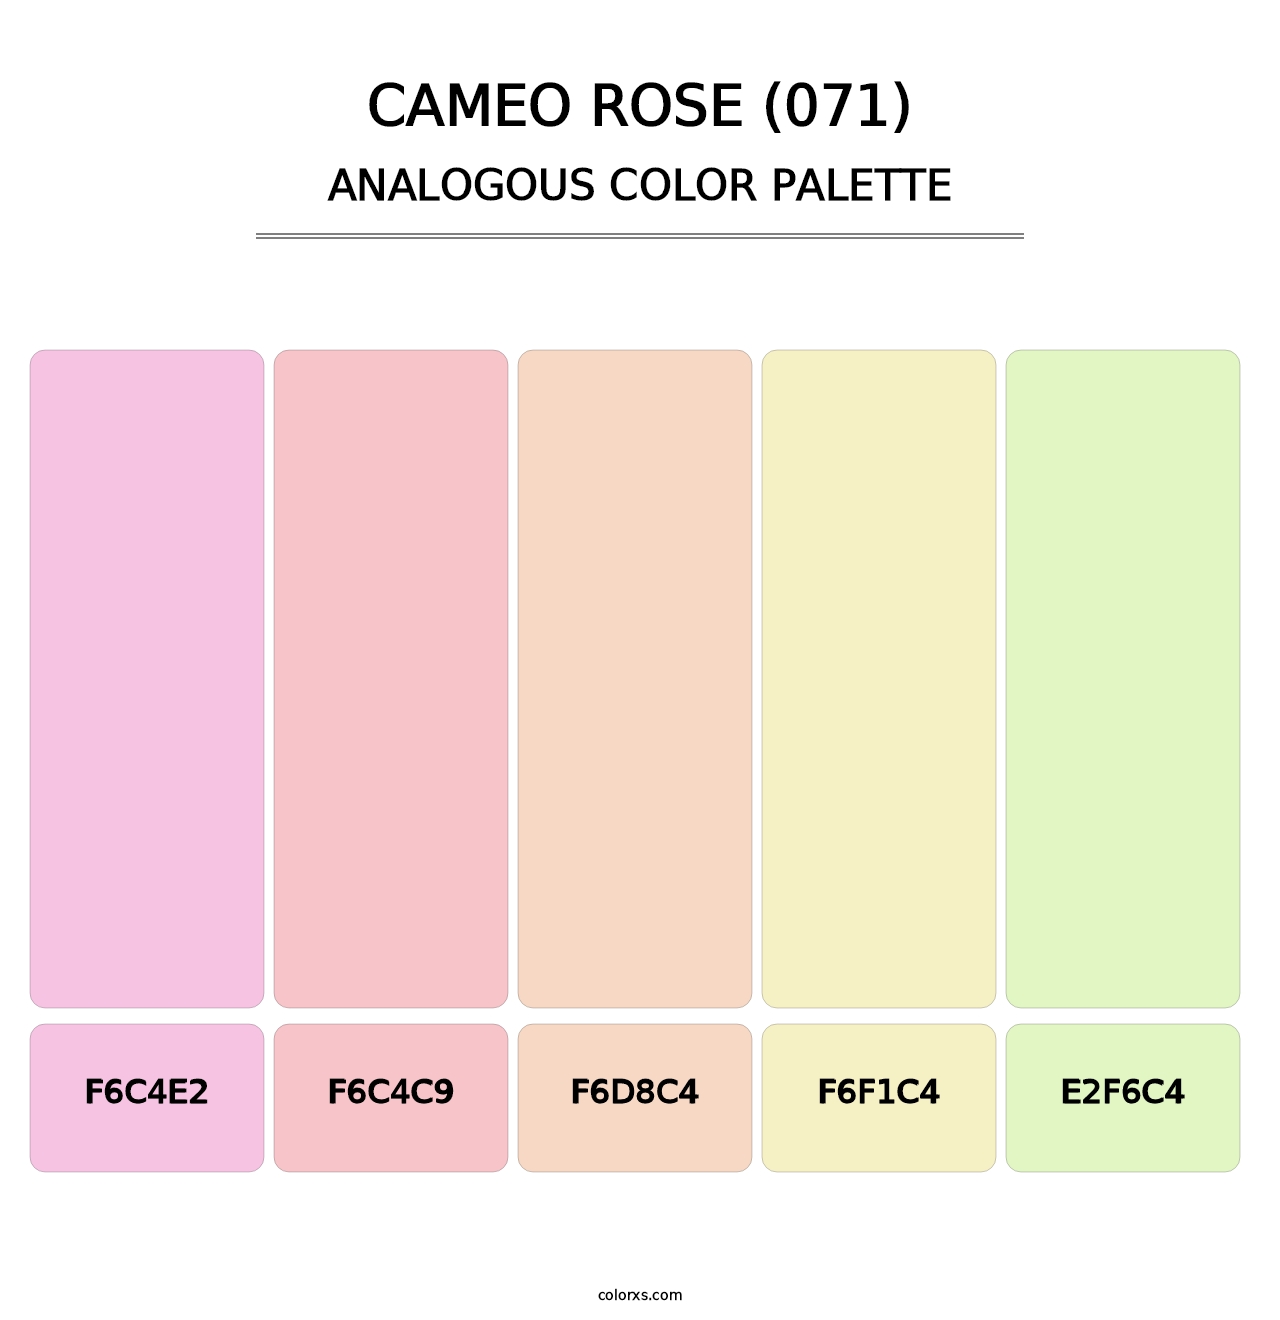 Cameo Rose (071) - Analogous Color Palette